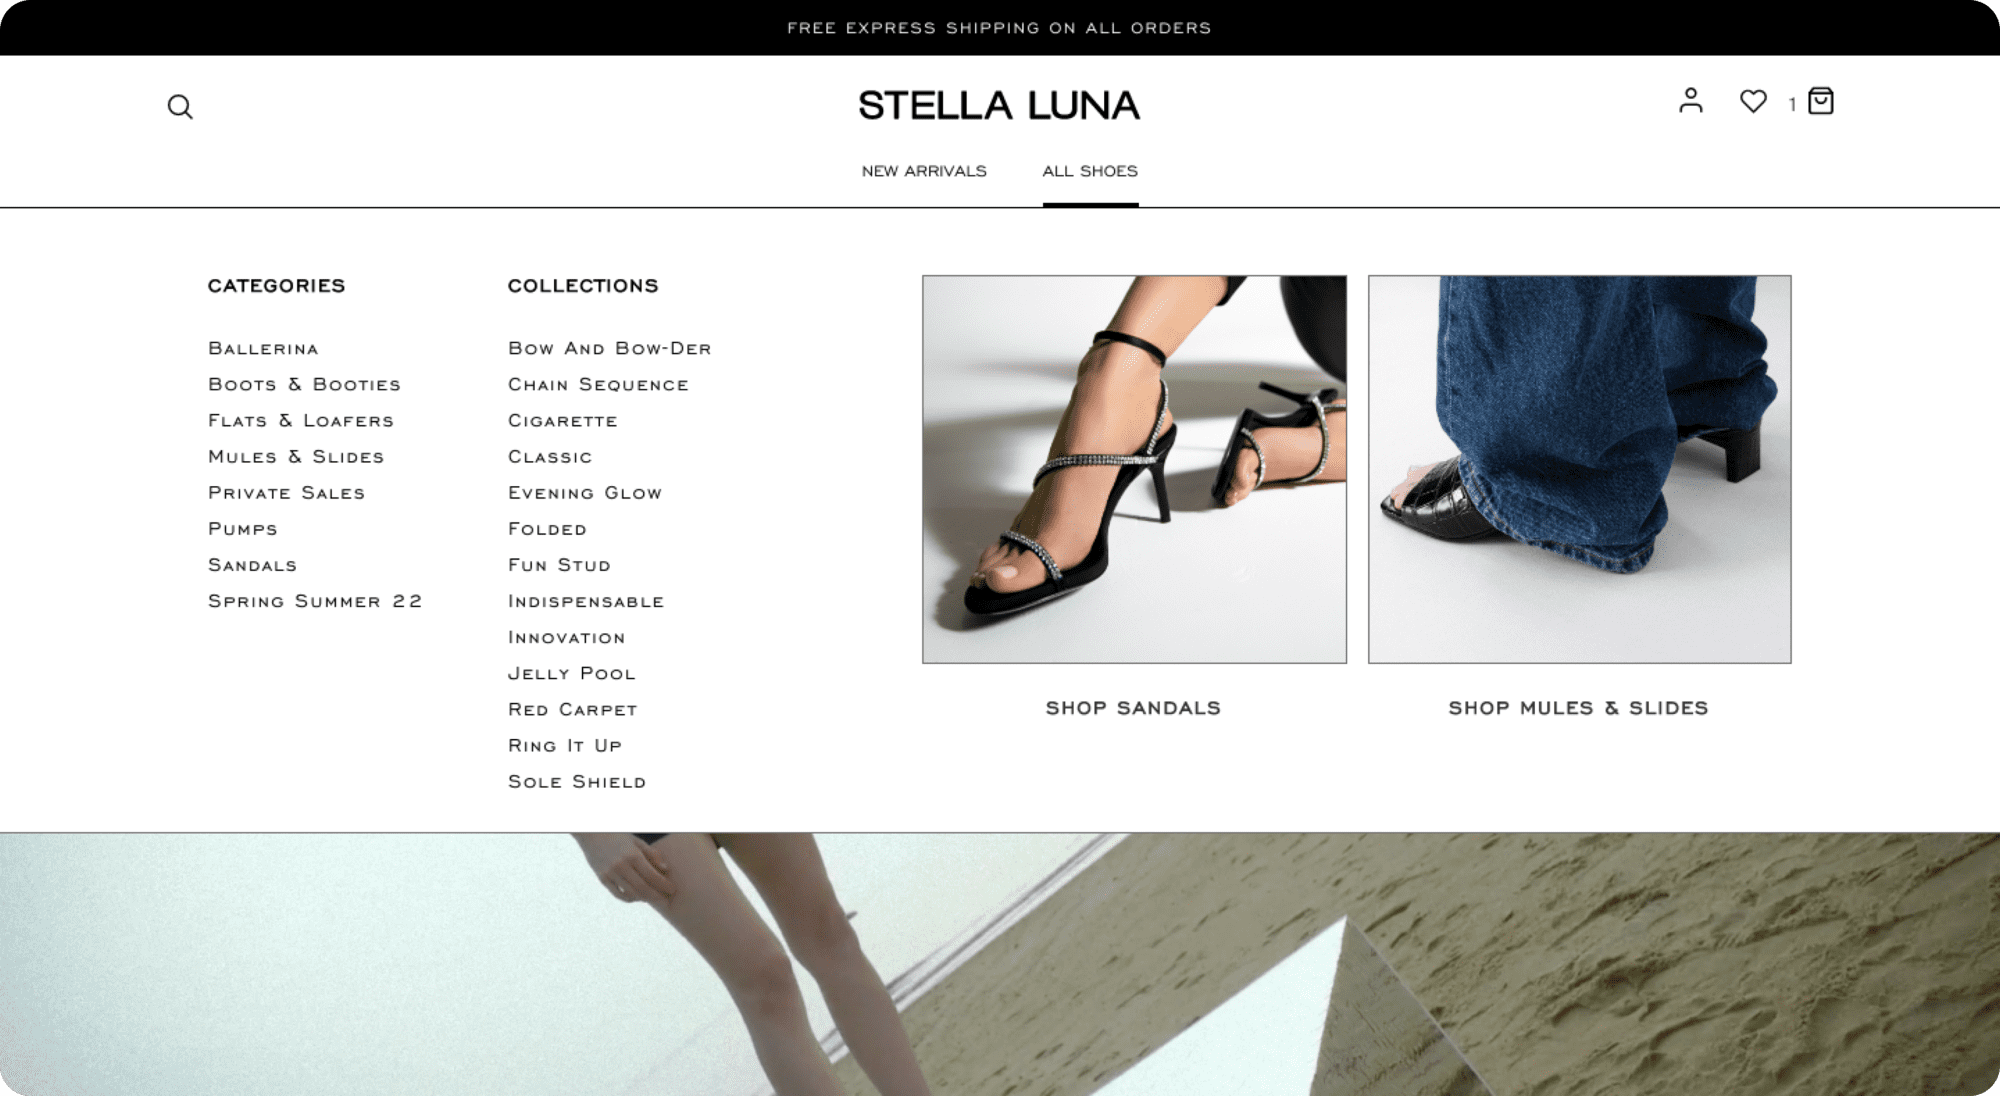 Stella Luna categorizes its products by types of shoes and collection names